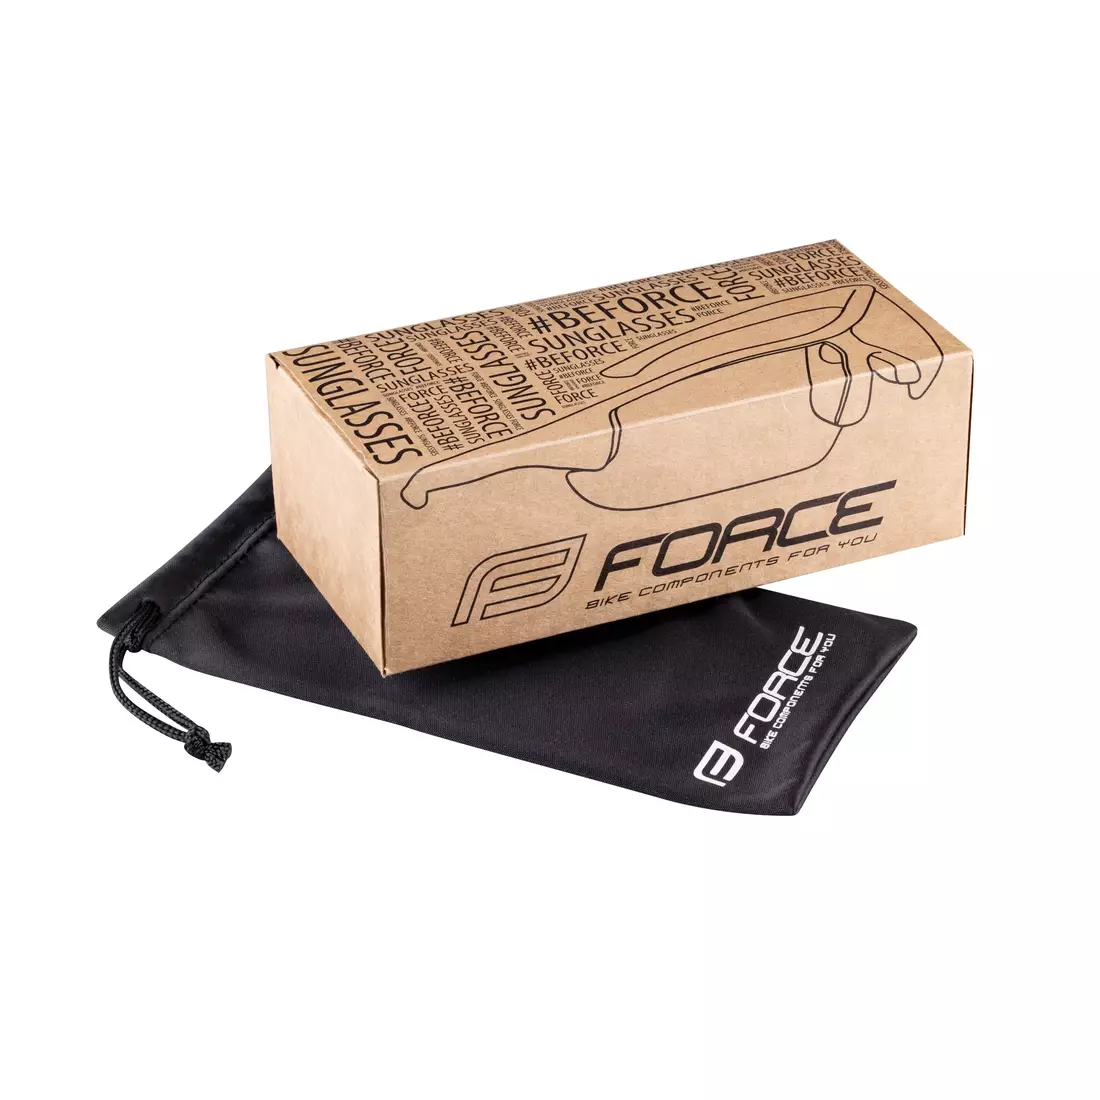 FORCE cycling / sports glasses OMBRO PLUS fluo mat, 91121